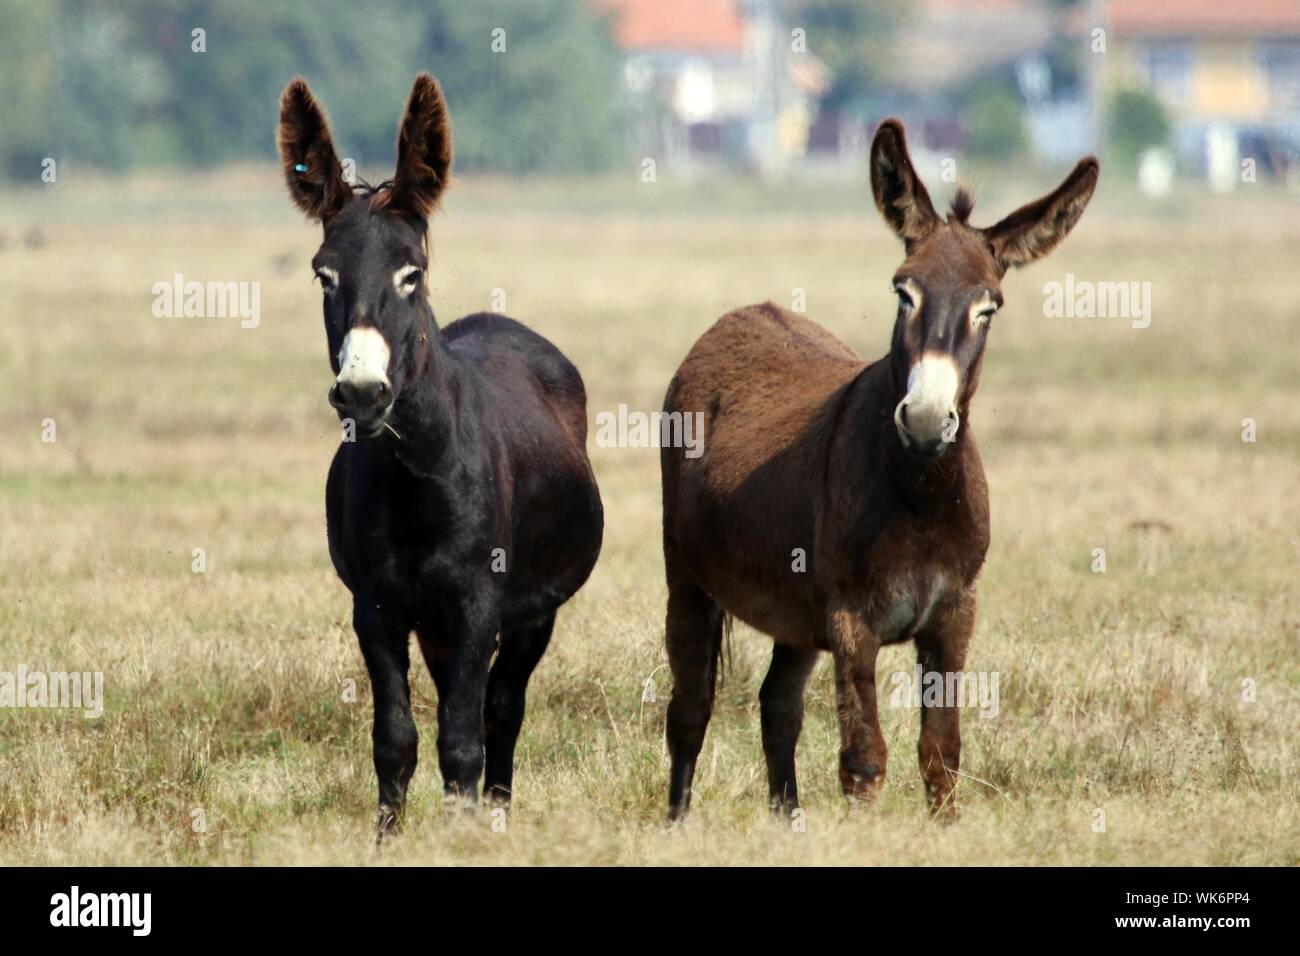 Full Length View Of Donkey Standing Grass Stock Photo